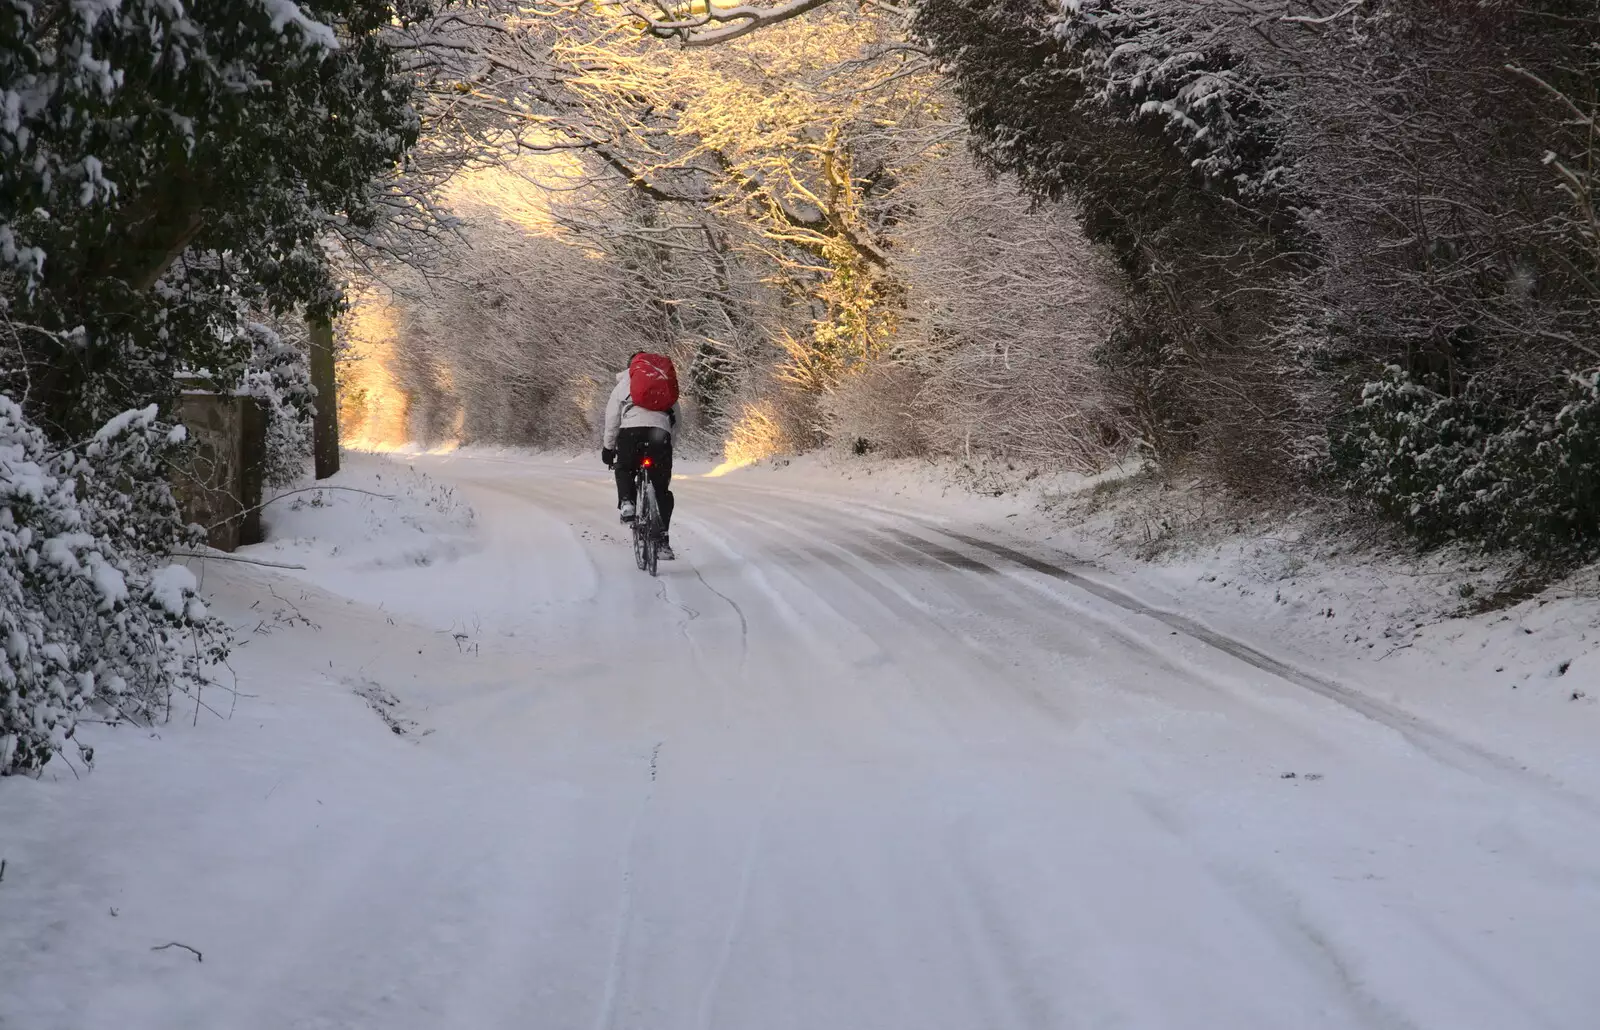 An intrepid cyclist heads towards Eye, from Snowmageddon: The Beast From the East, Suffolk and London - 27th February 2018